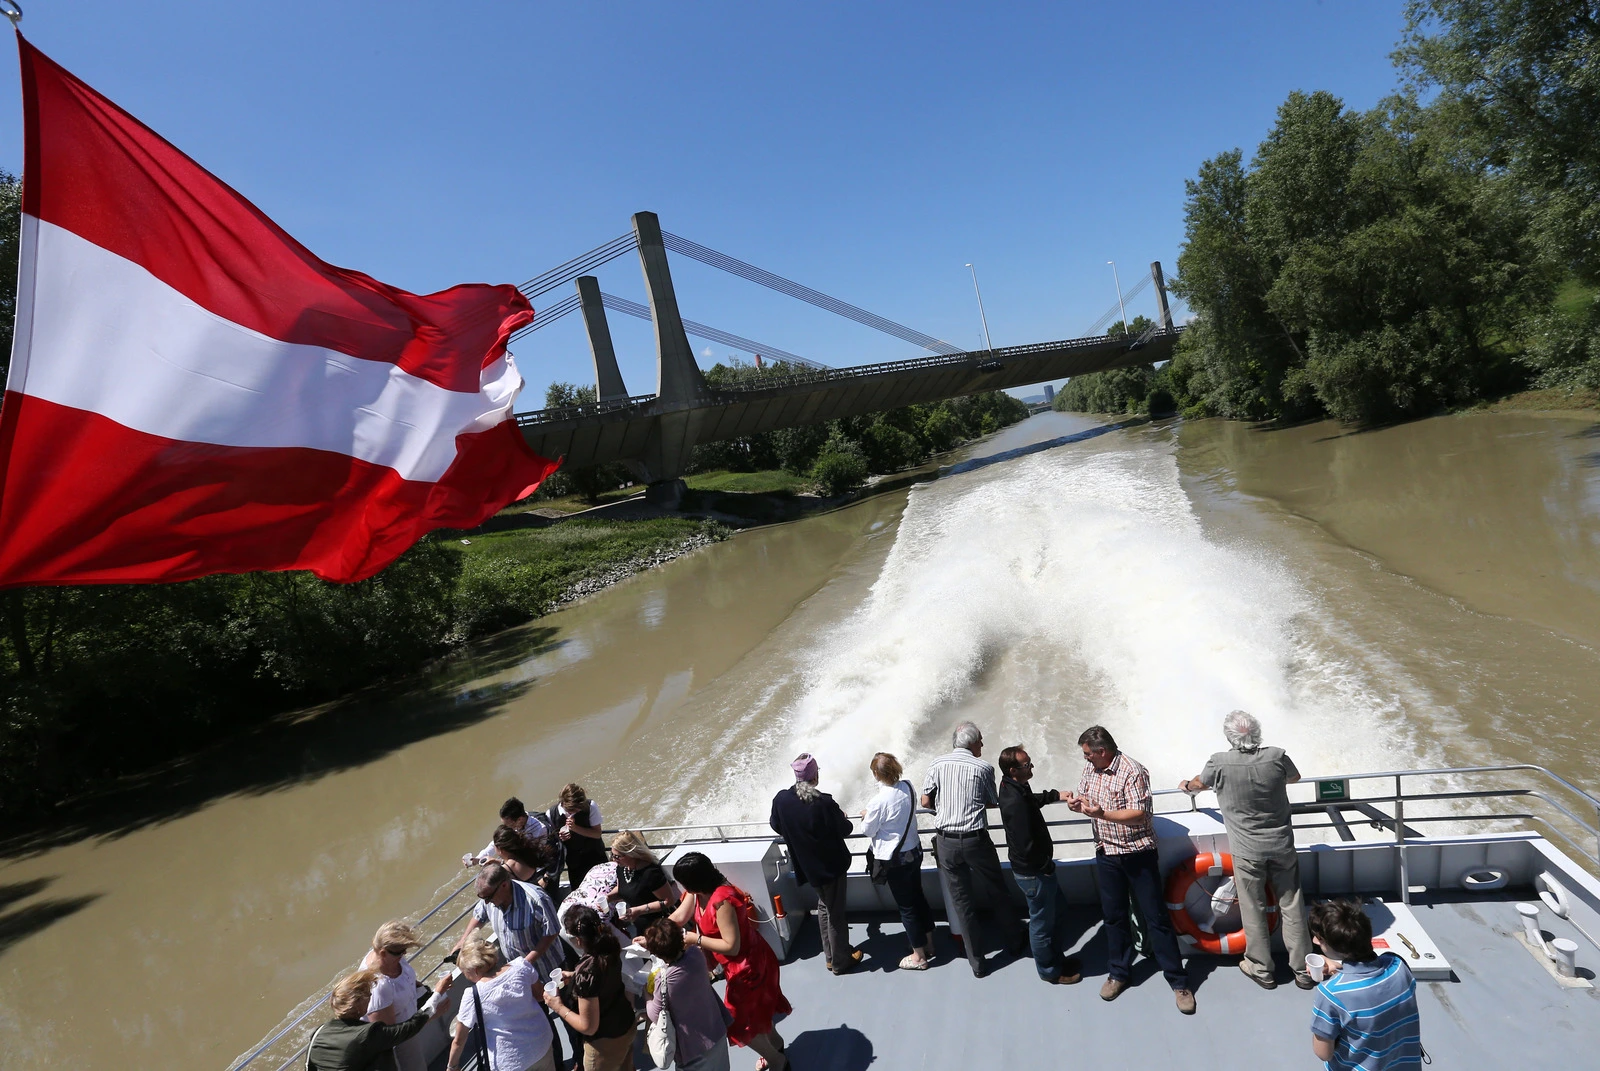 Bulgarian cruise ship crashes into wall on Danube in Austria, injuring 11